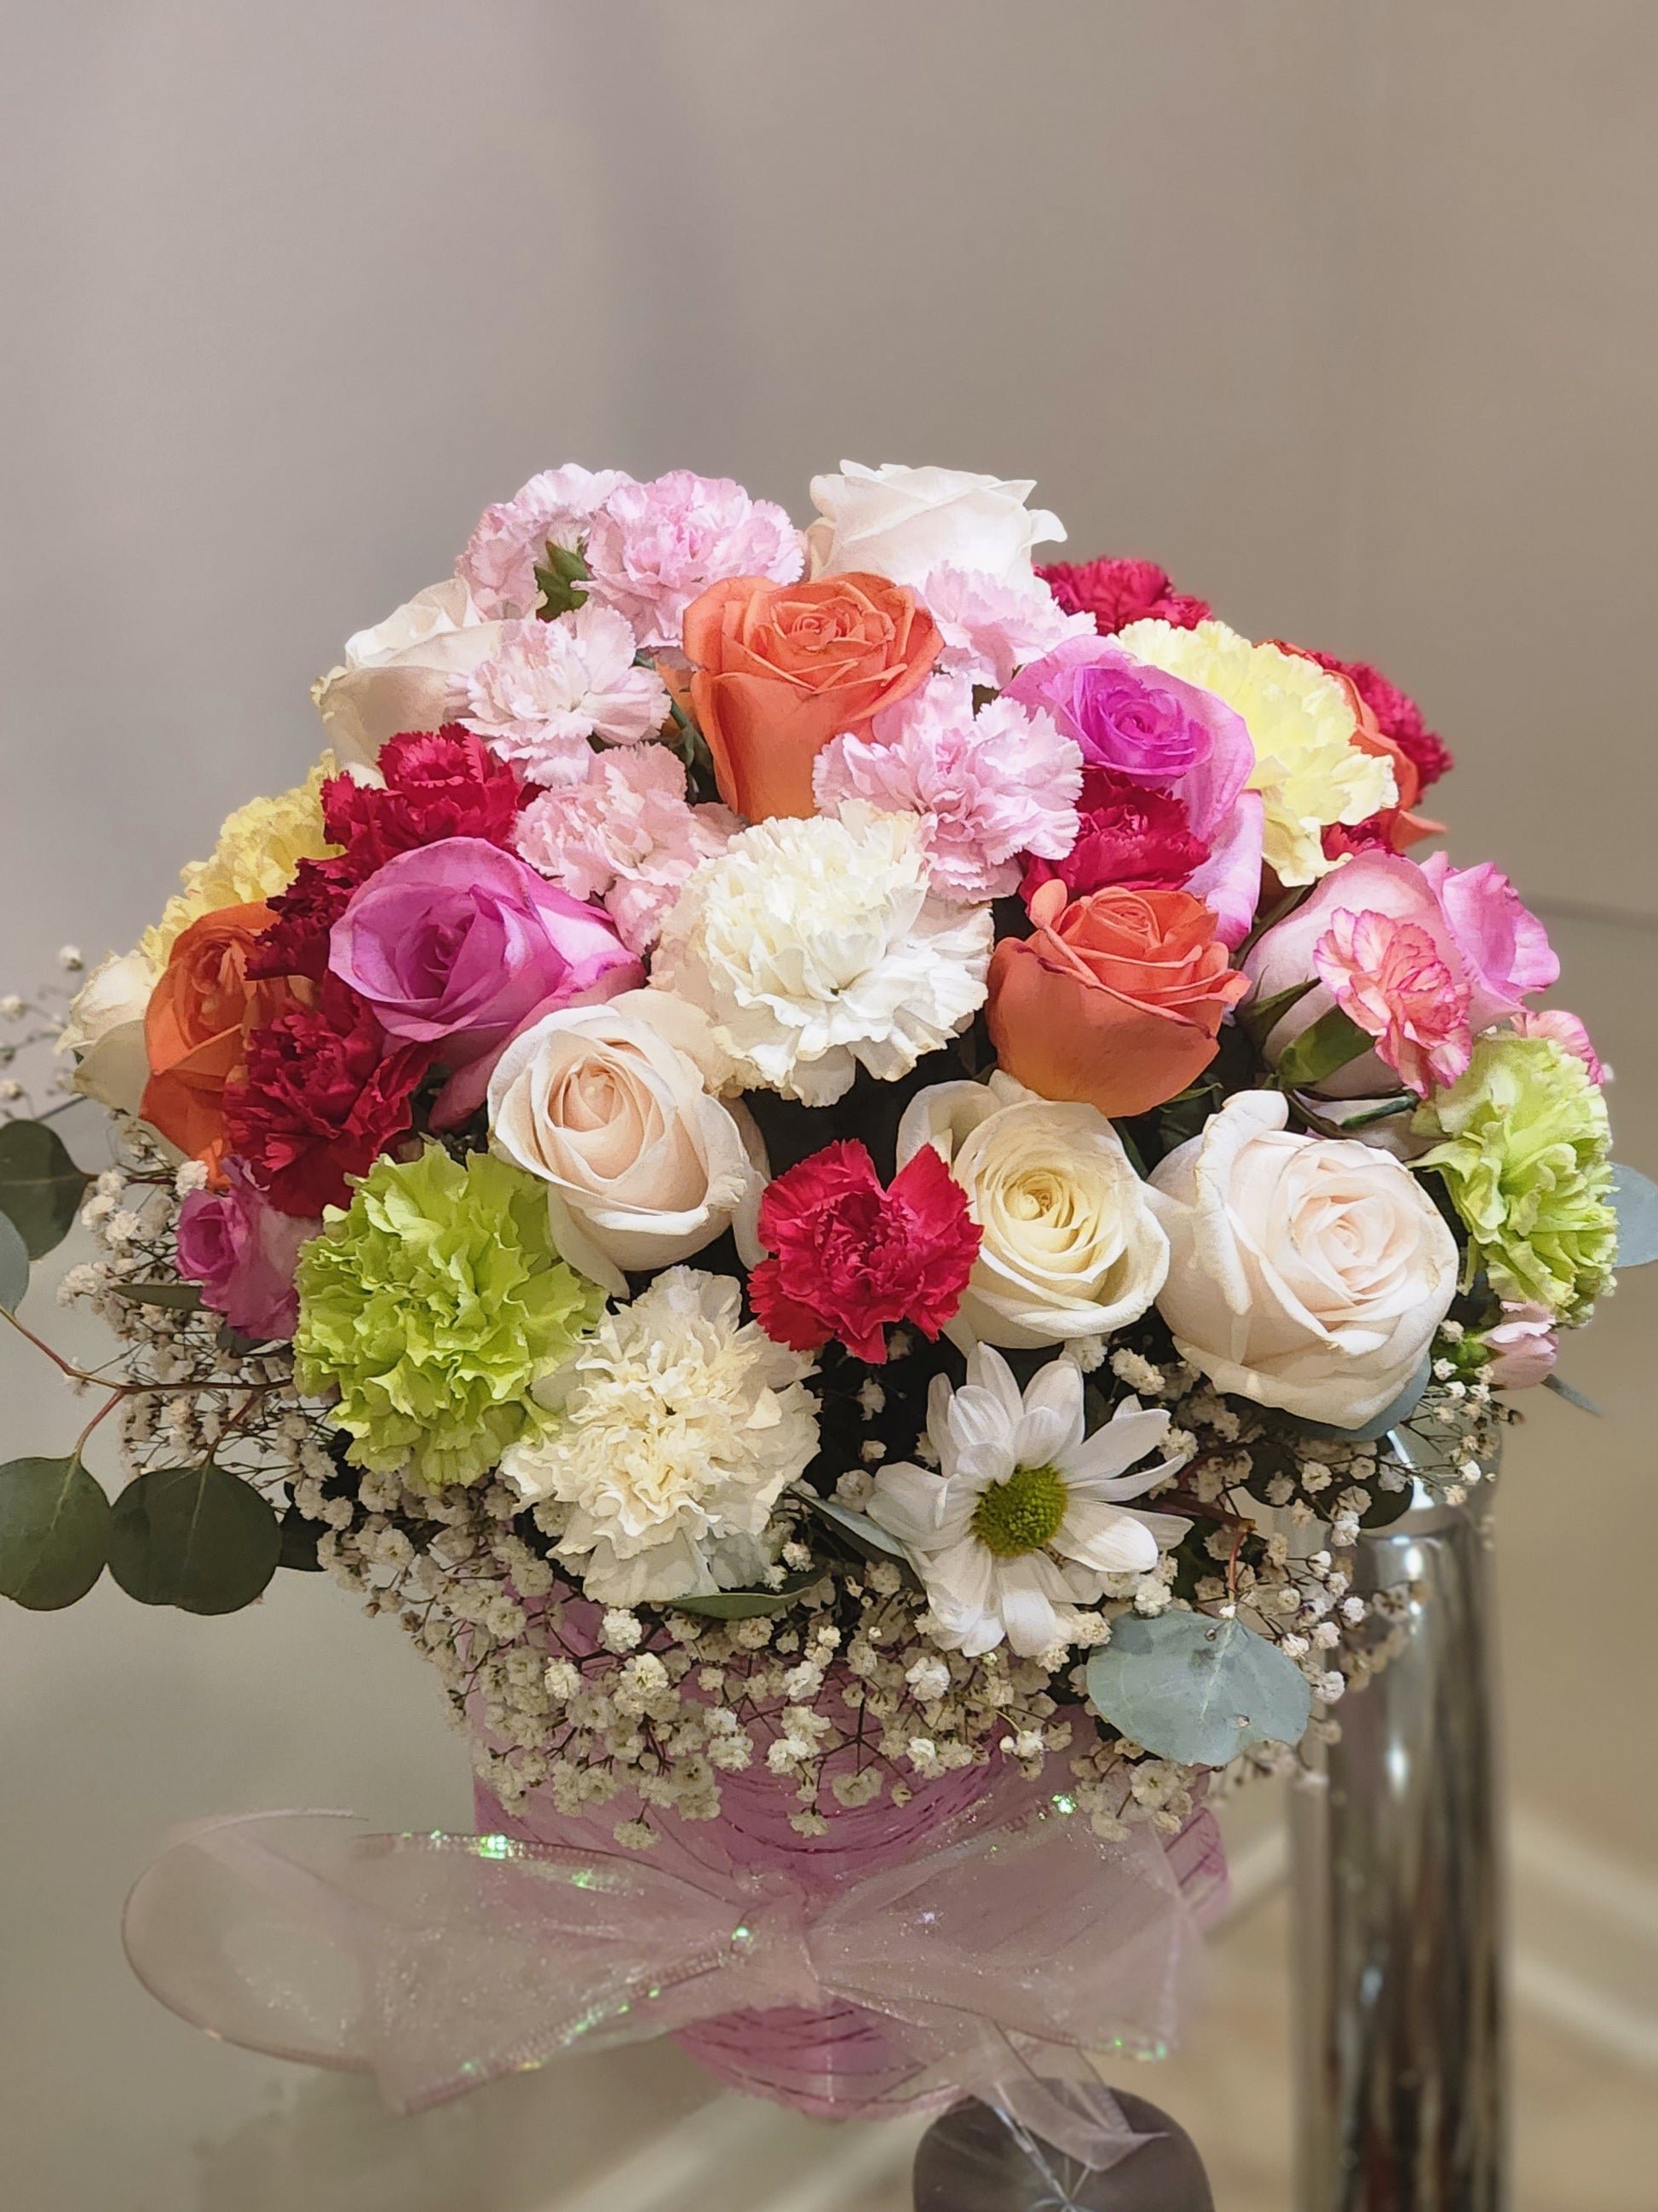 Sweet Success - Beauty Flowers For You